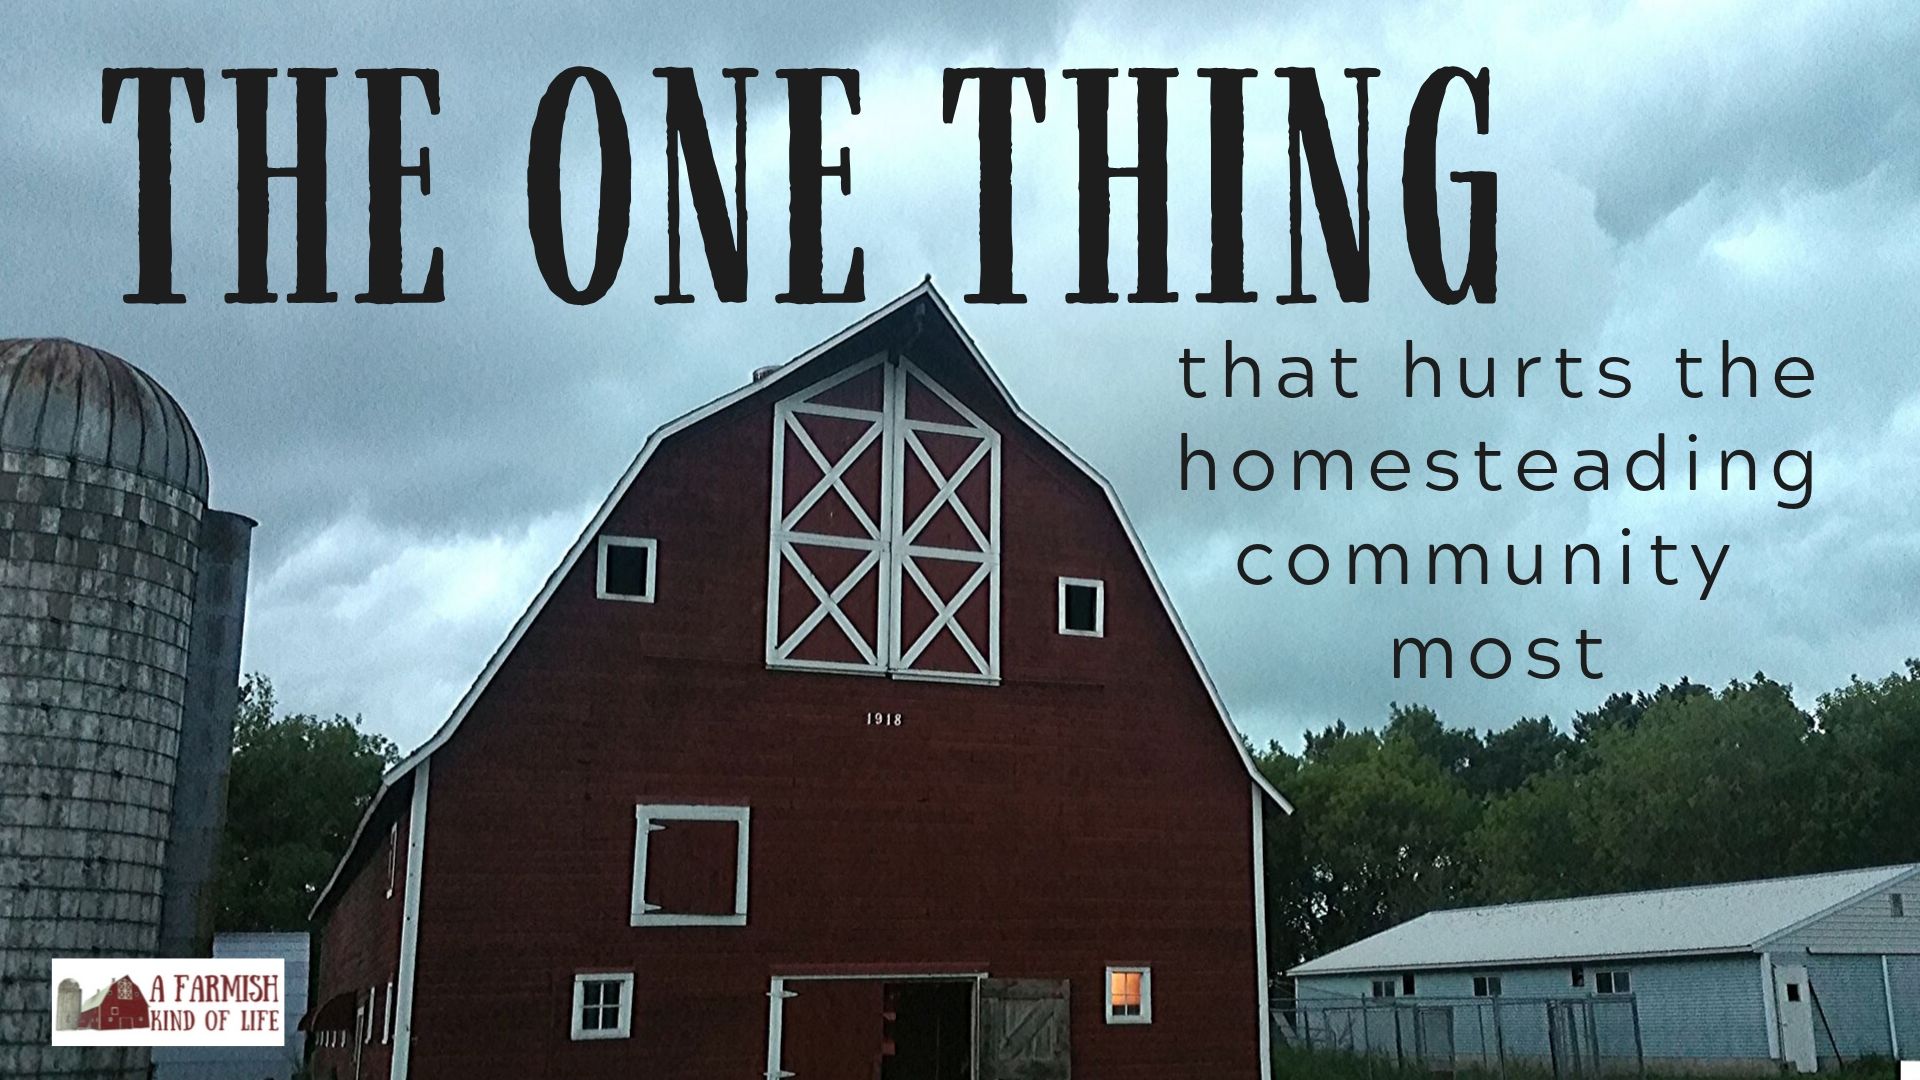 063: The One Thing that Hurts the Homesteading Community Most